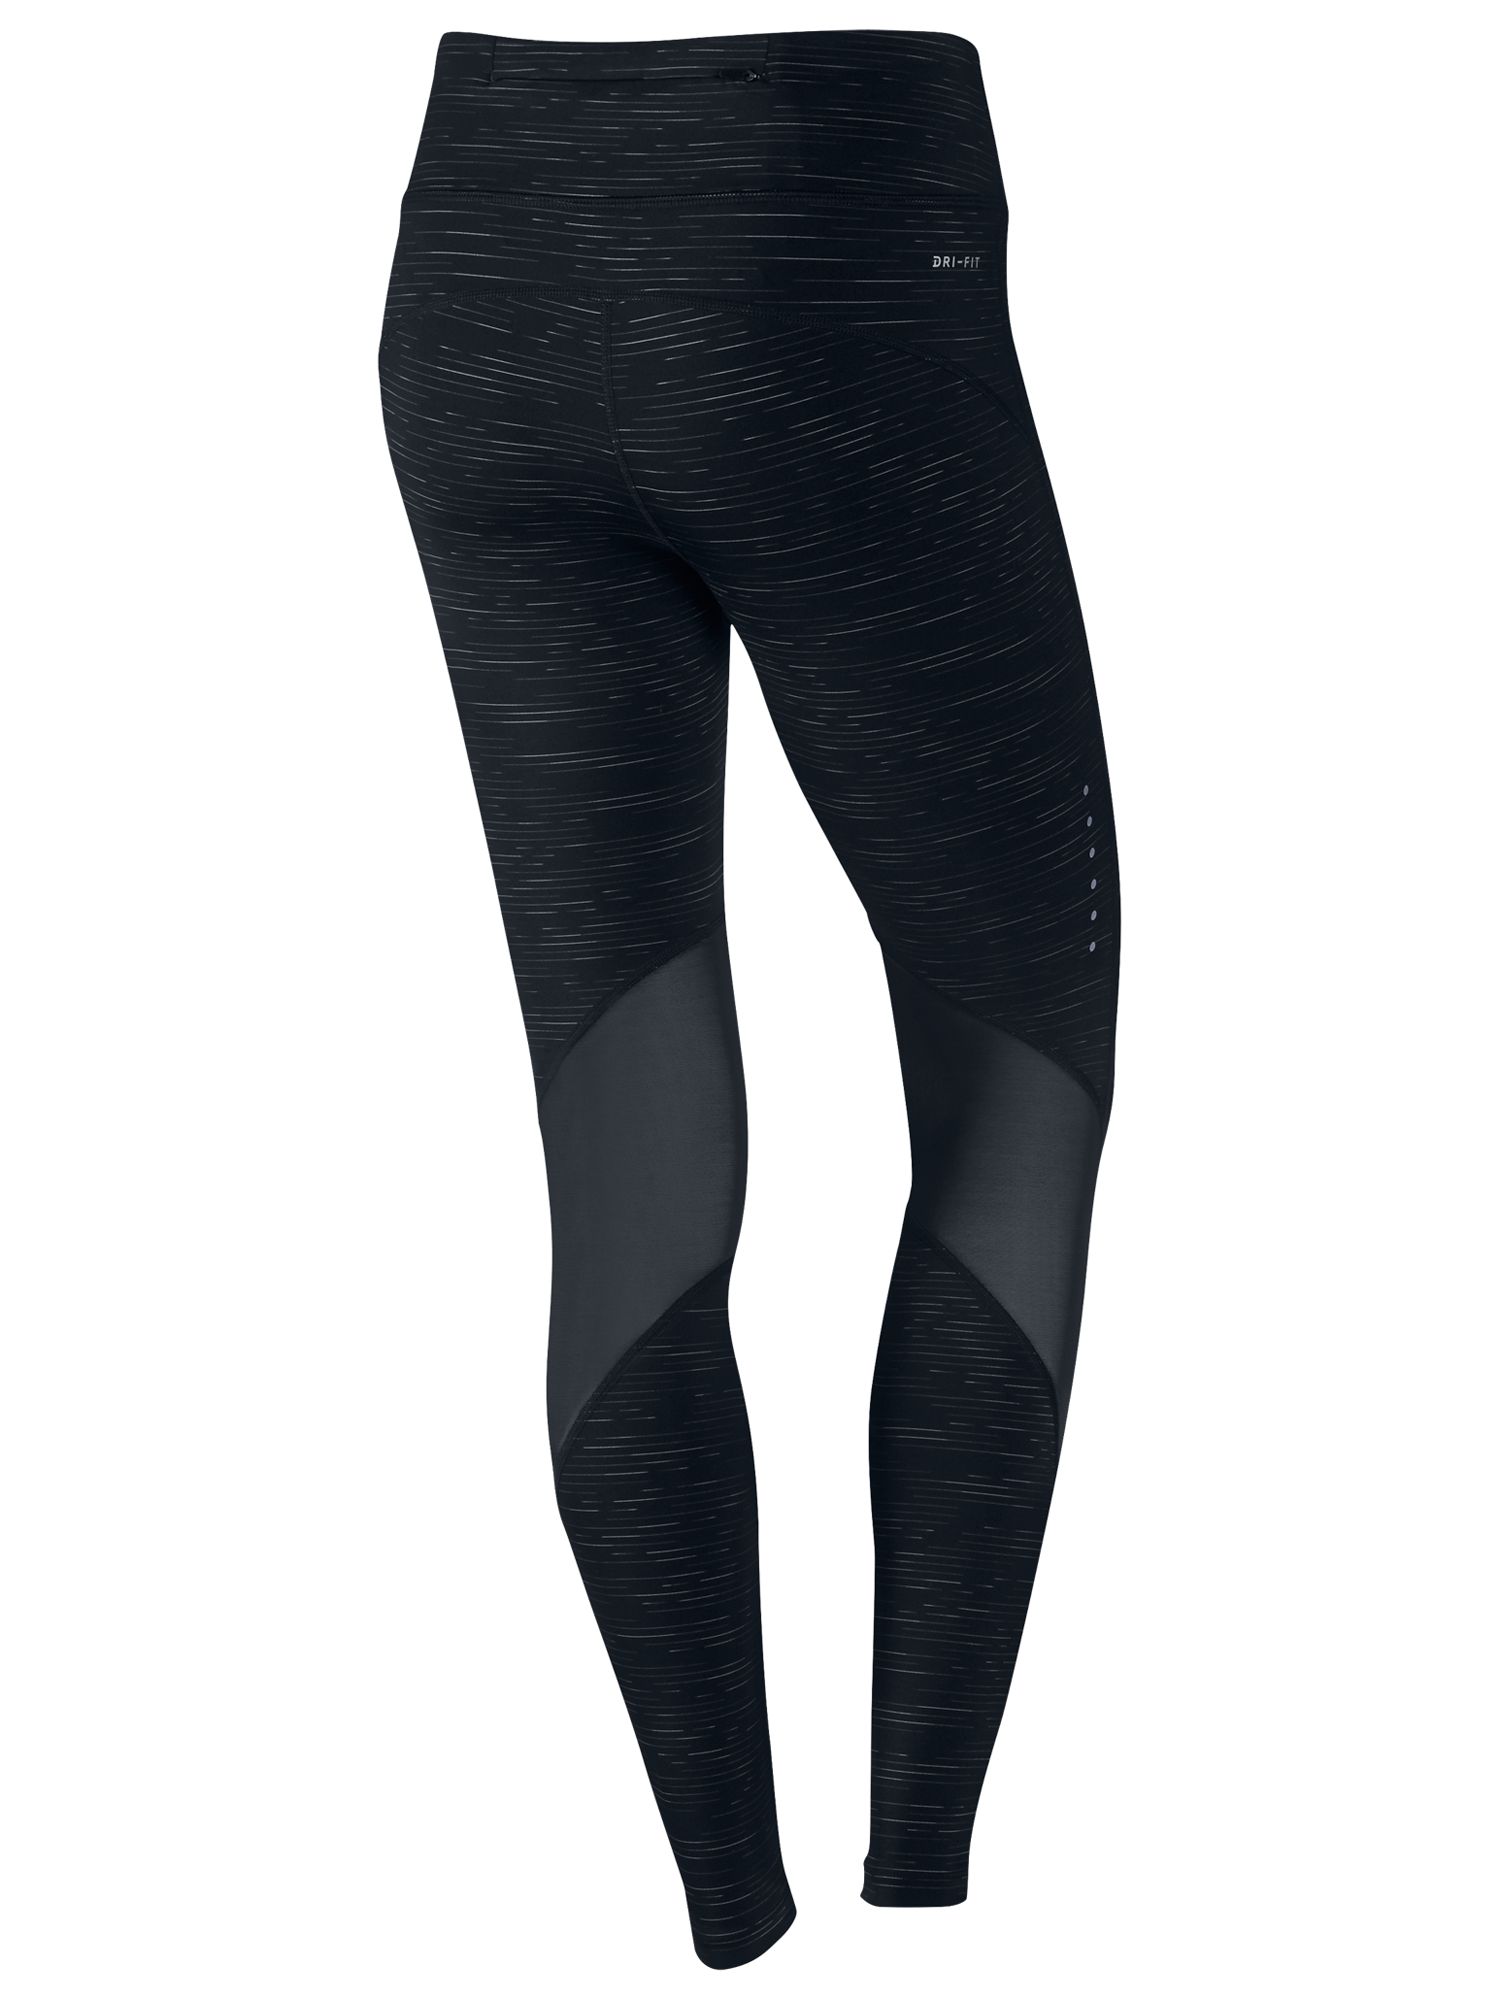 nike epic lux tights uk